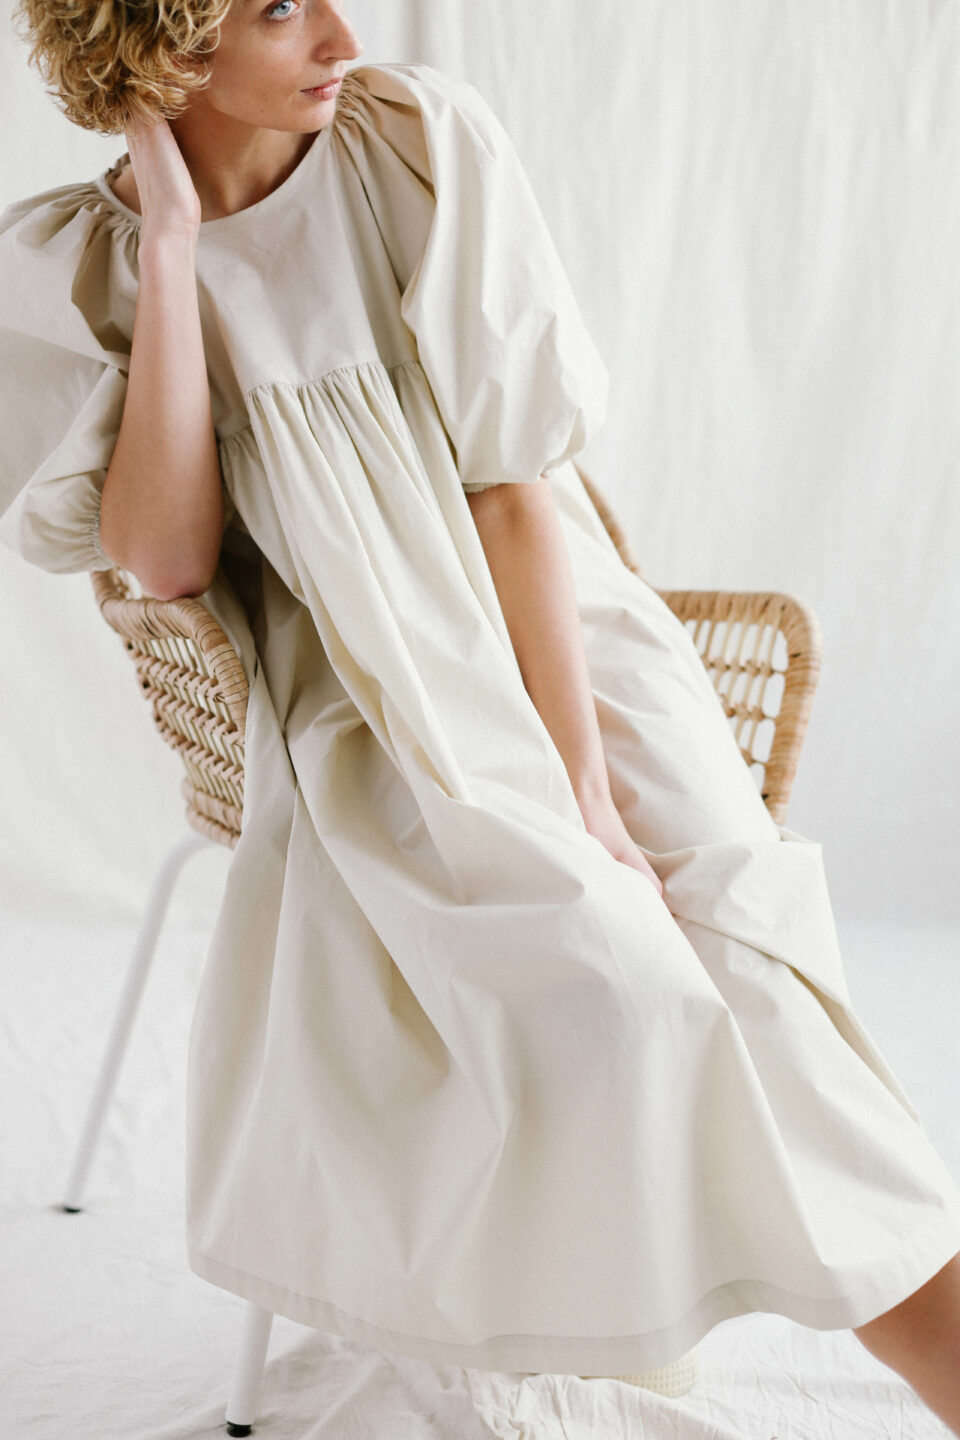 Empire waist puffy sleeve dress BELLE | Dress | Sustainable clothing | OffOn clothing